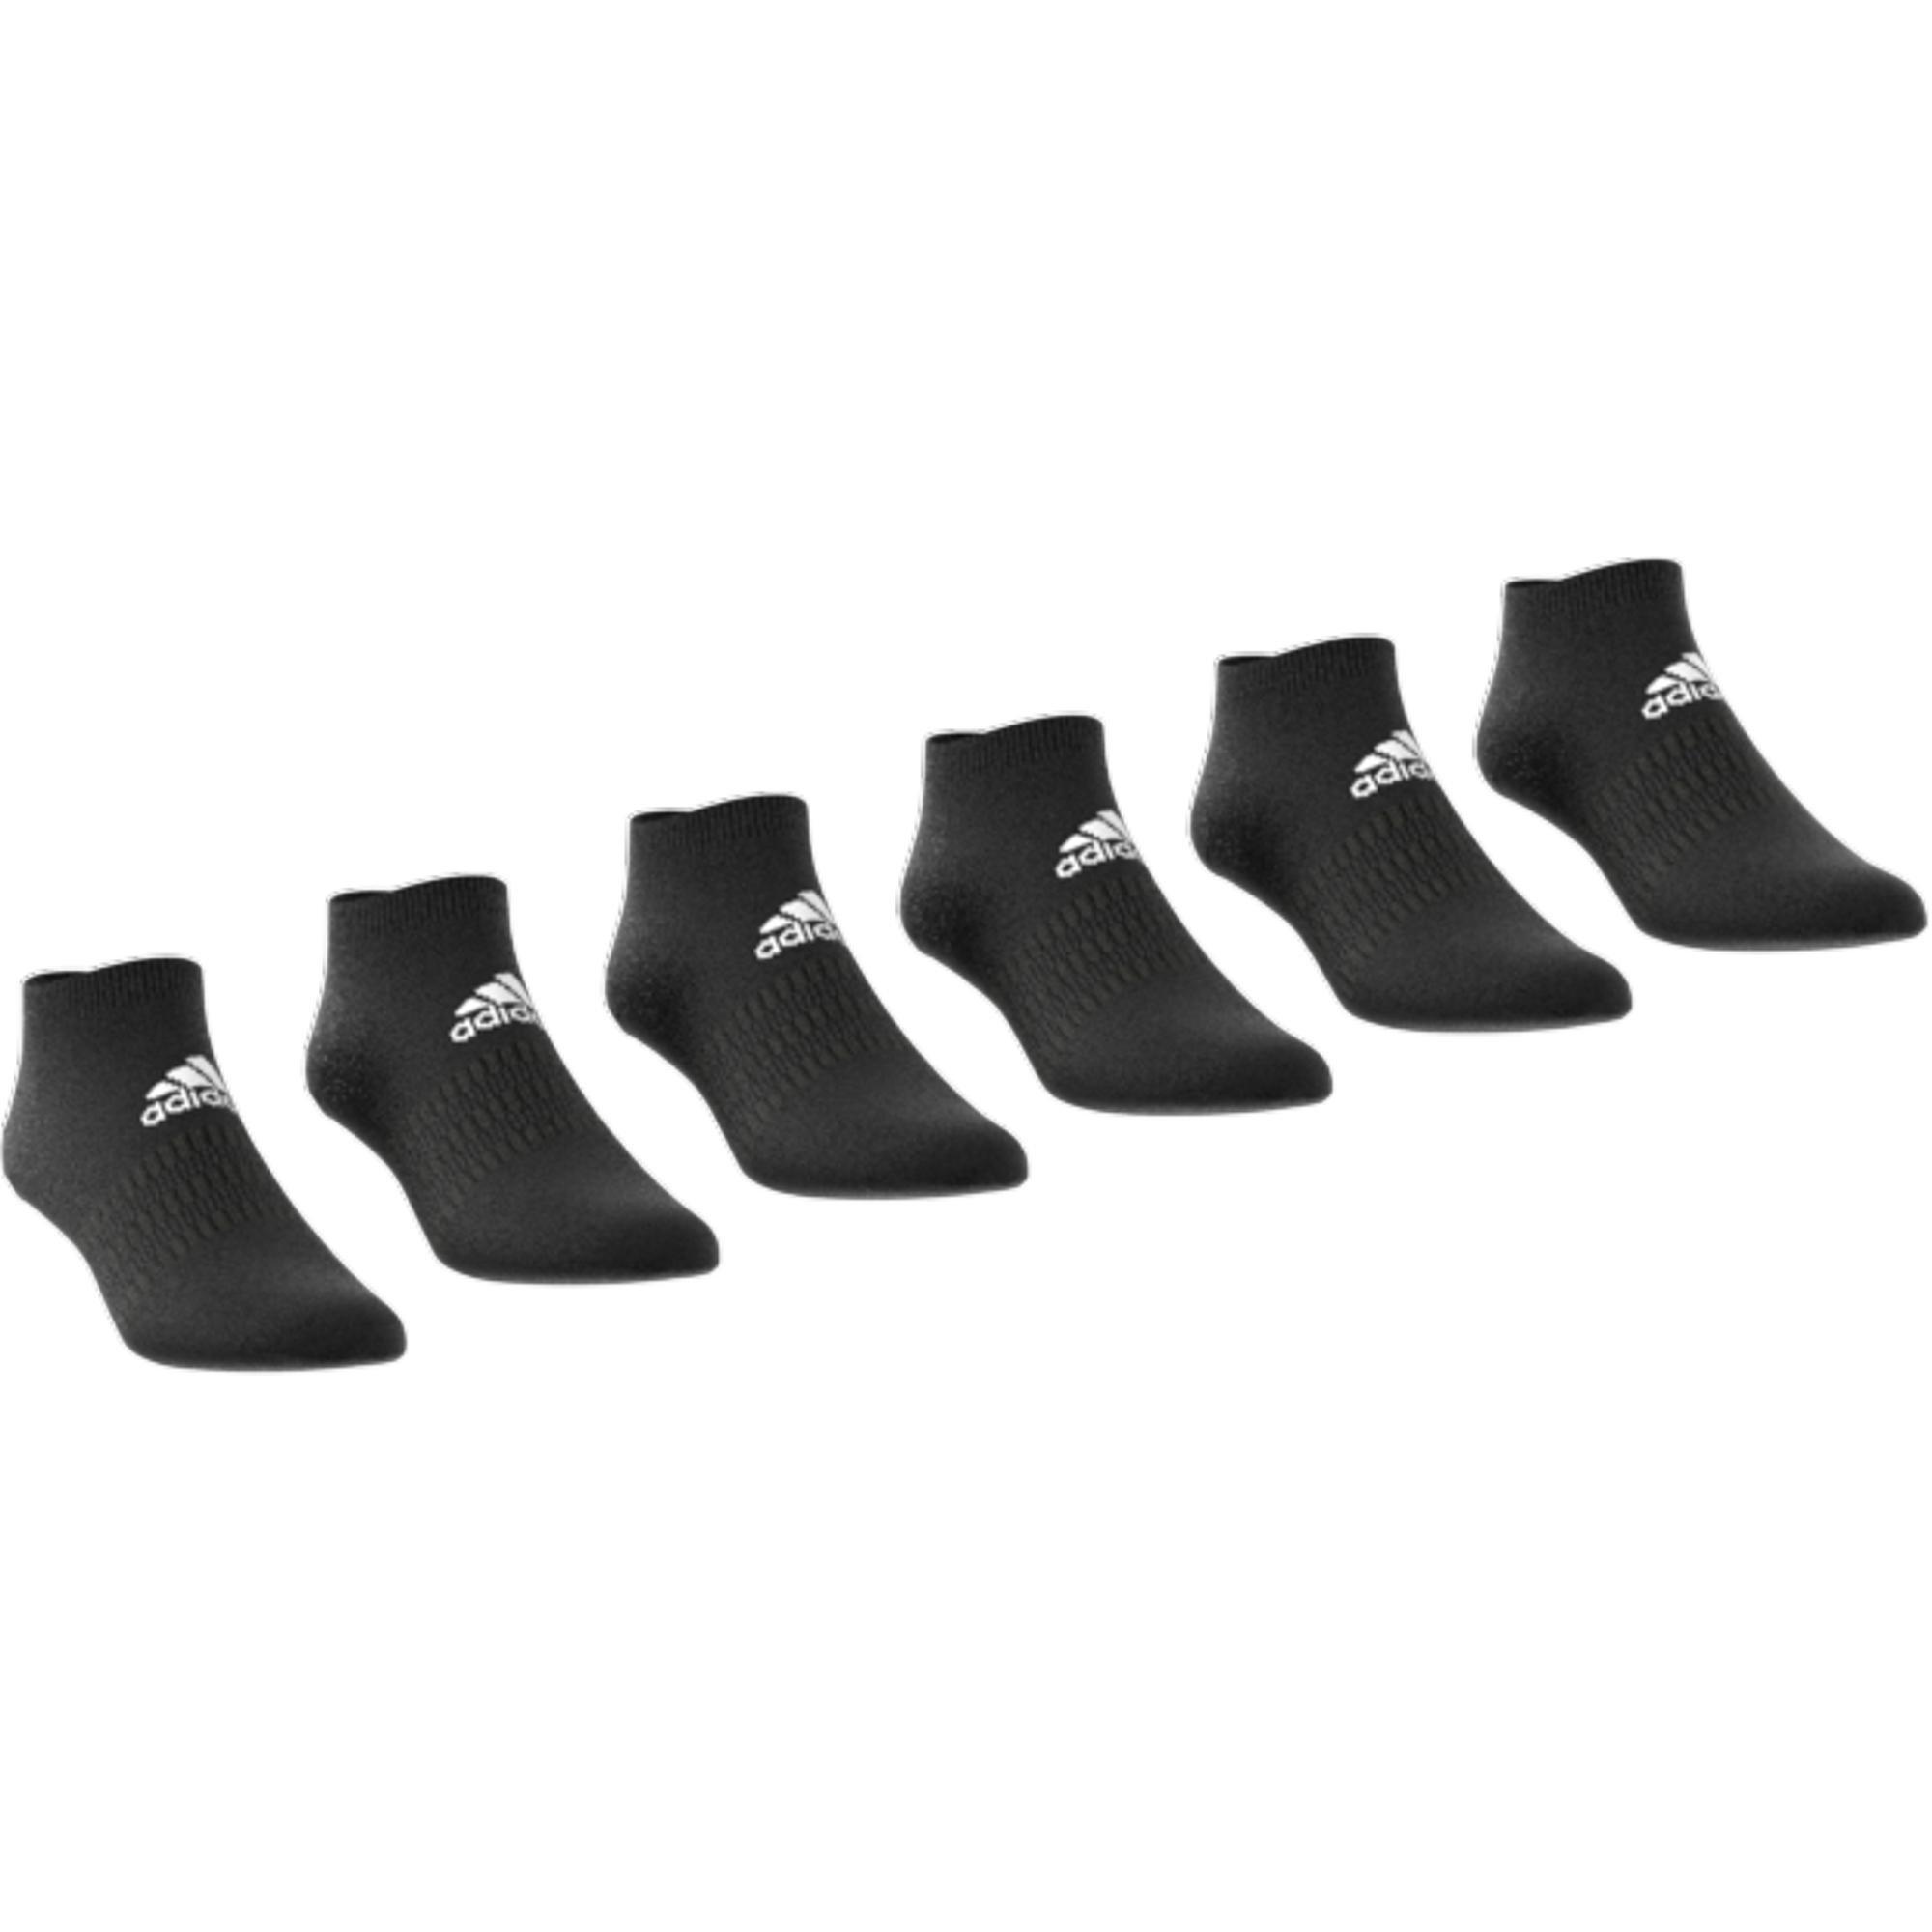 Unisex Low-Cut Socks 6 Pairs, Black, A901_ONE, large image number 0